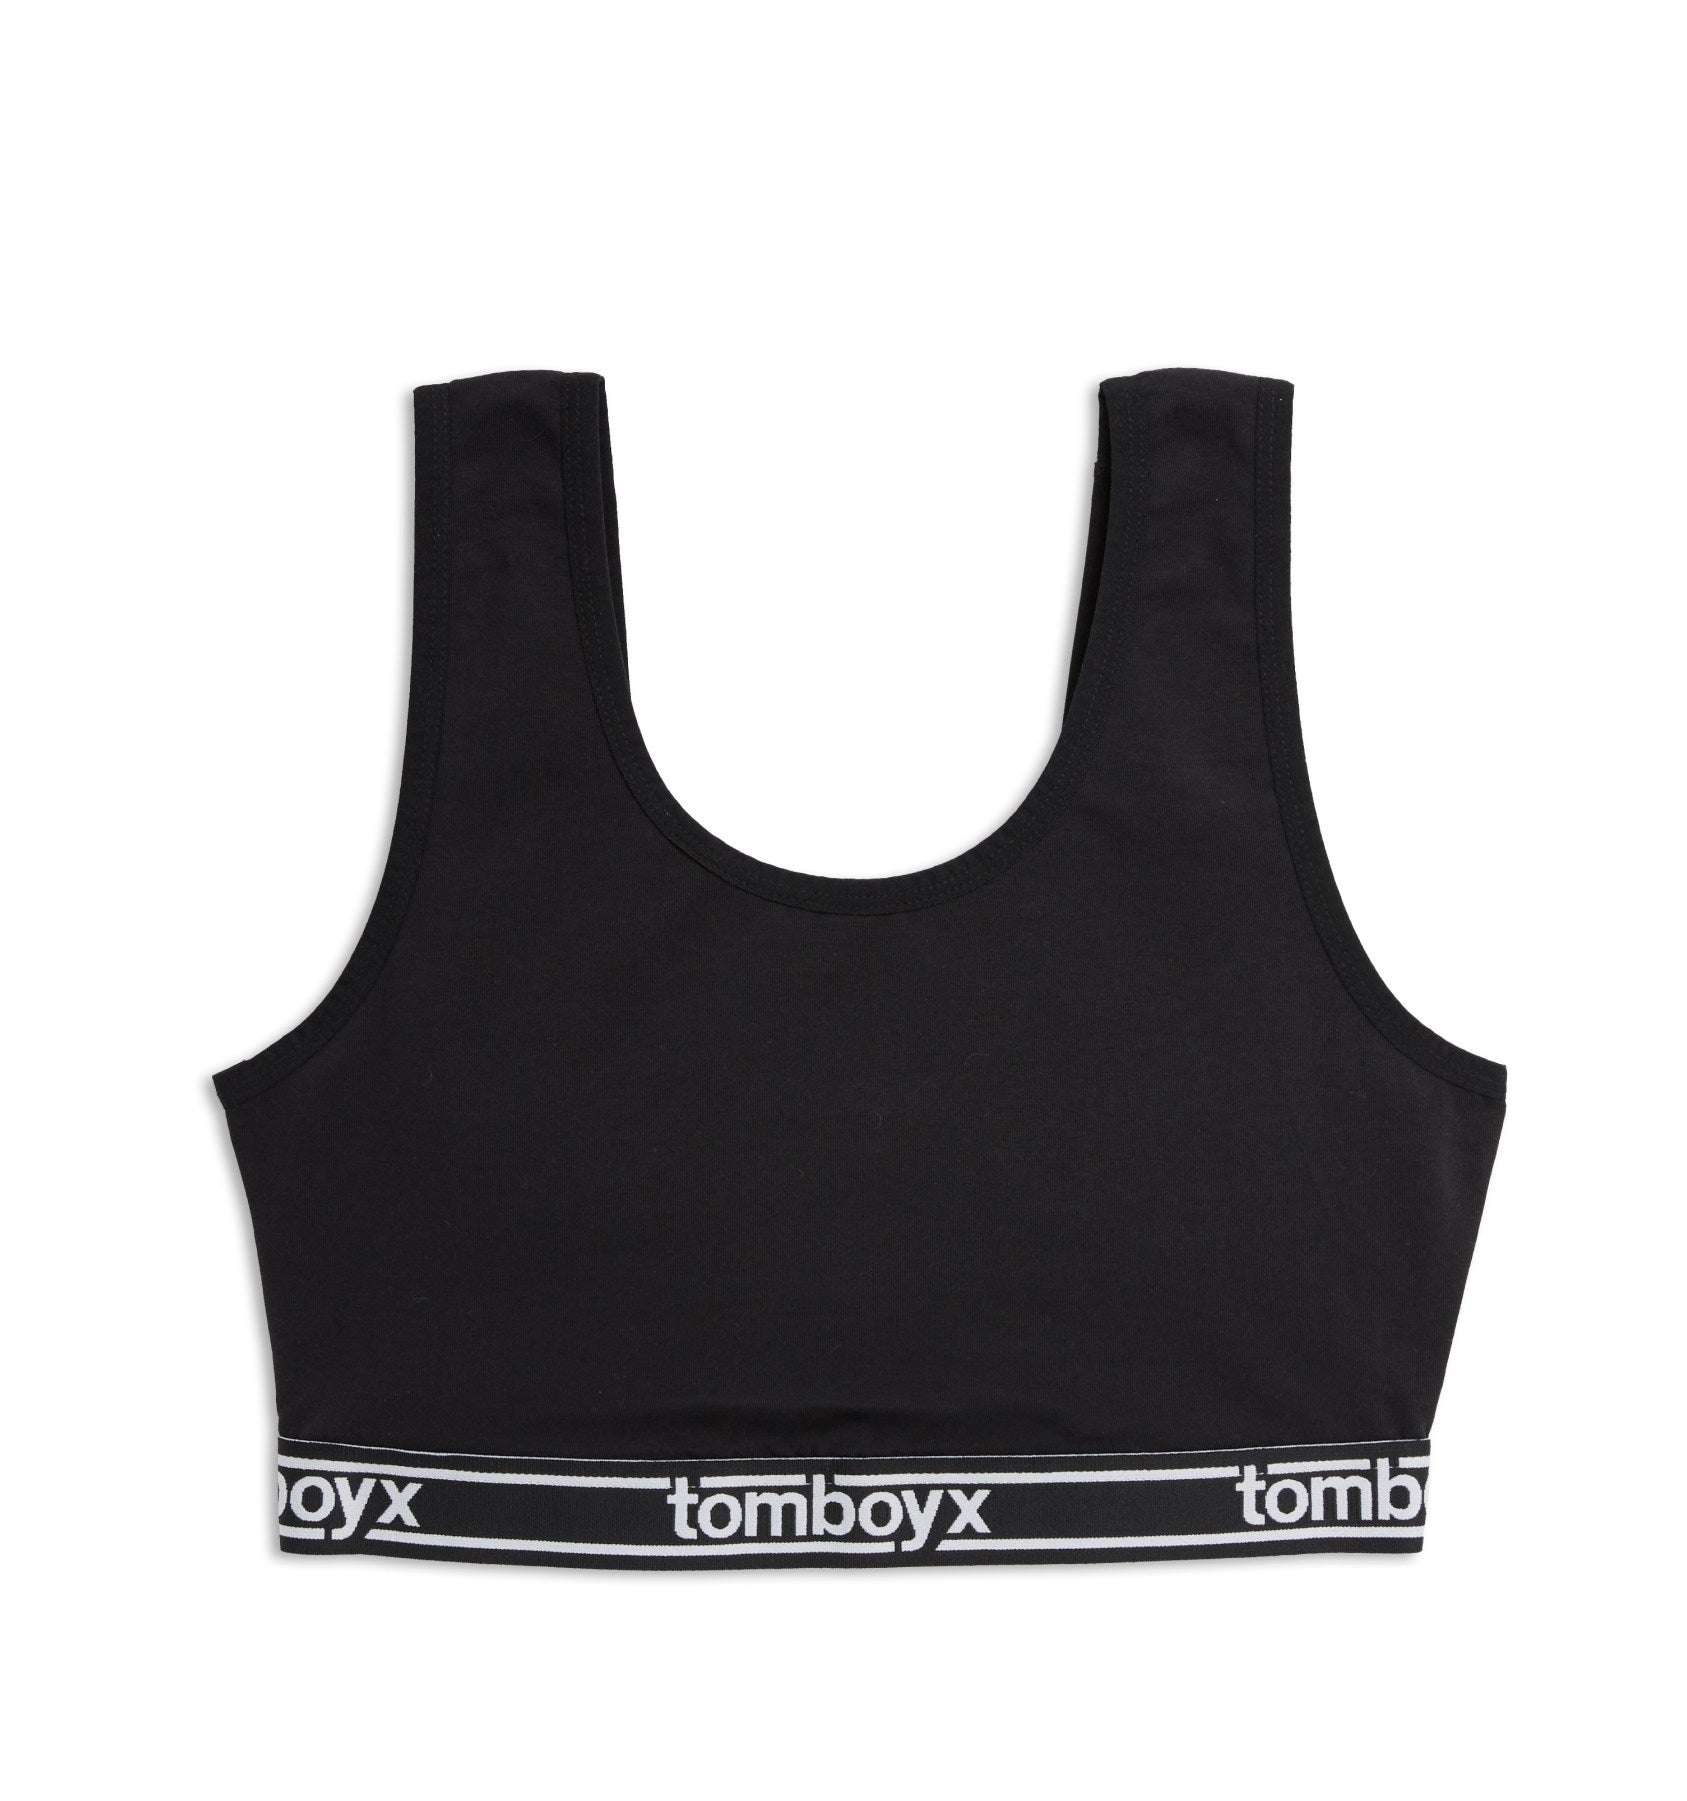  TomboyX Sports Bra, High Impact Full Support, Wirefree